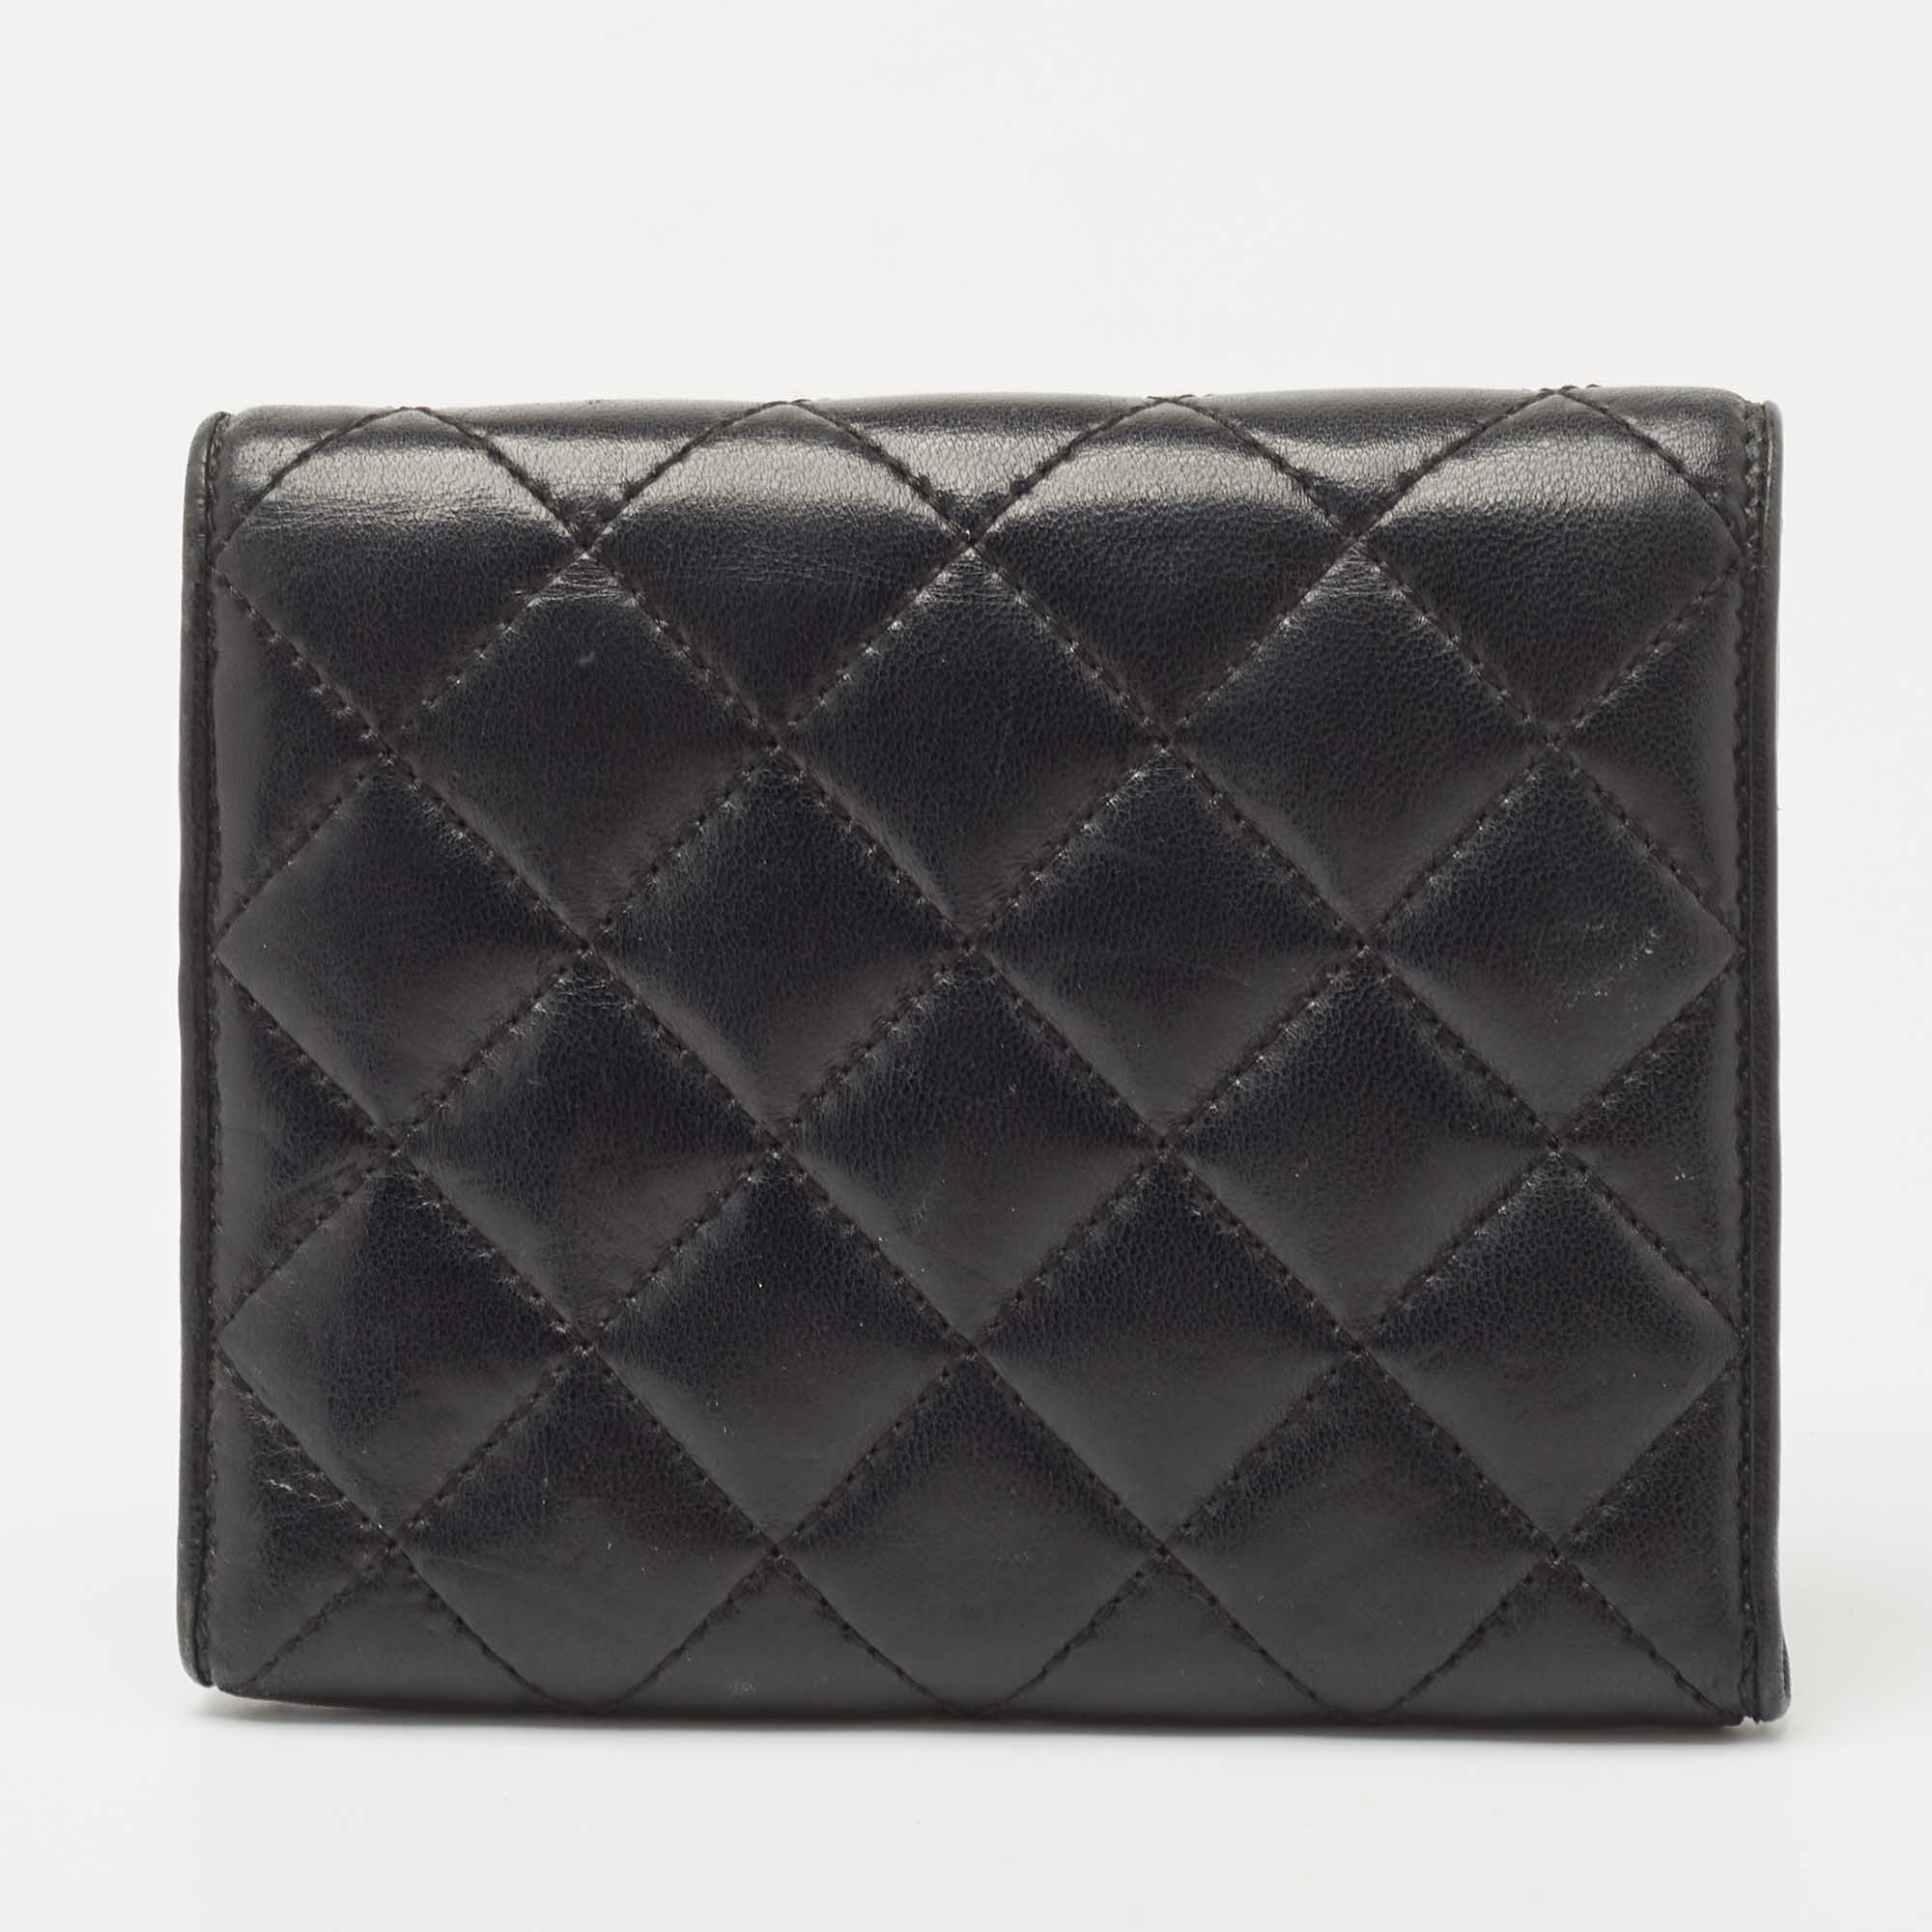 CH Carolina Herrera Black Quilted Leather Logo Trifold Wallet